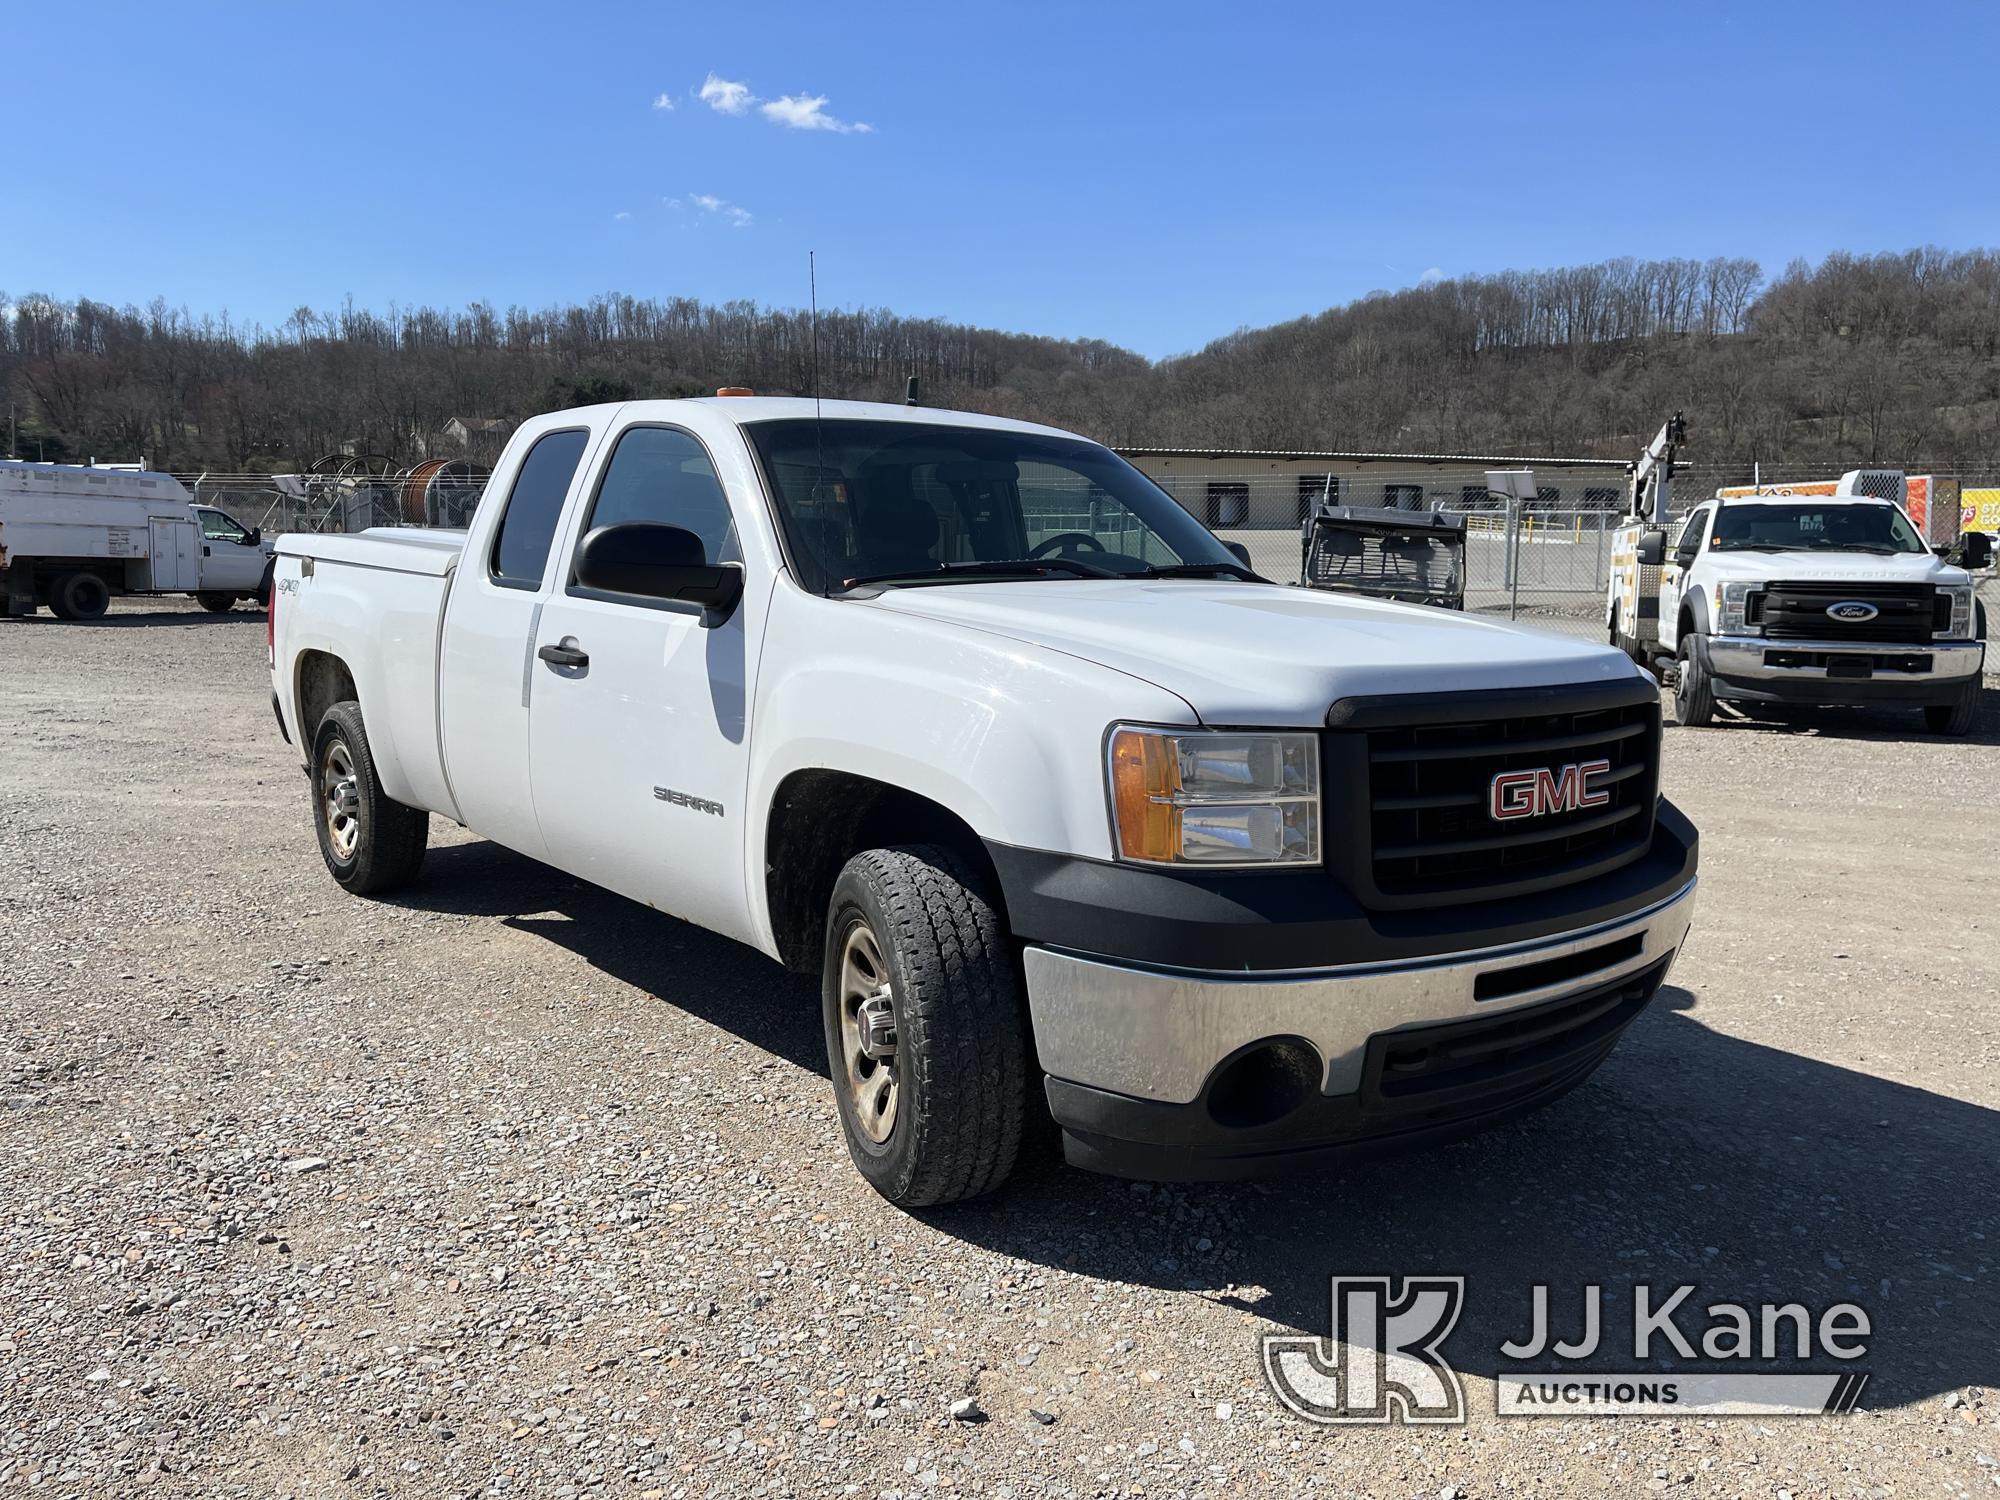 (Smock, PA) 2013 GMC Sierra 1500 4x4 Extended-Cab Pickup Truck Title Delay) (Runs & Moves, Check Eng